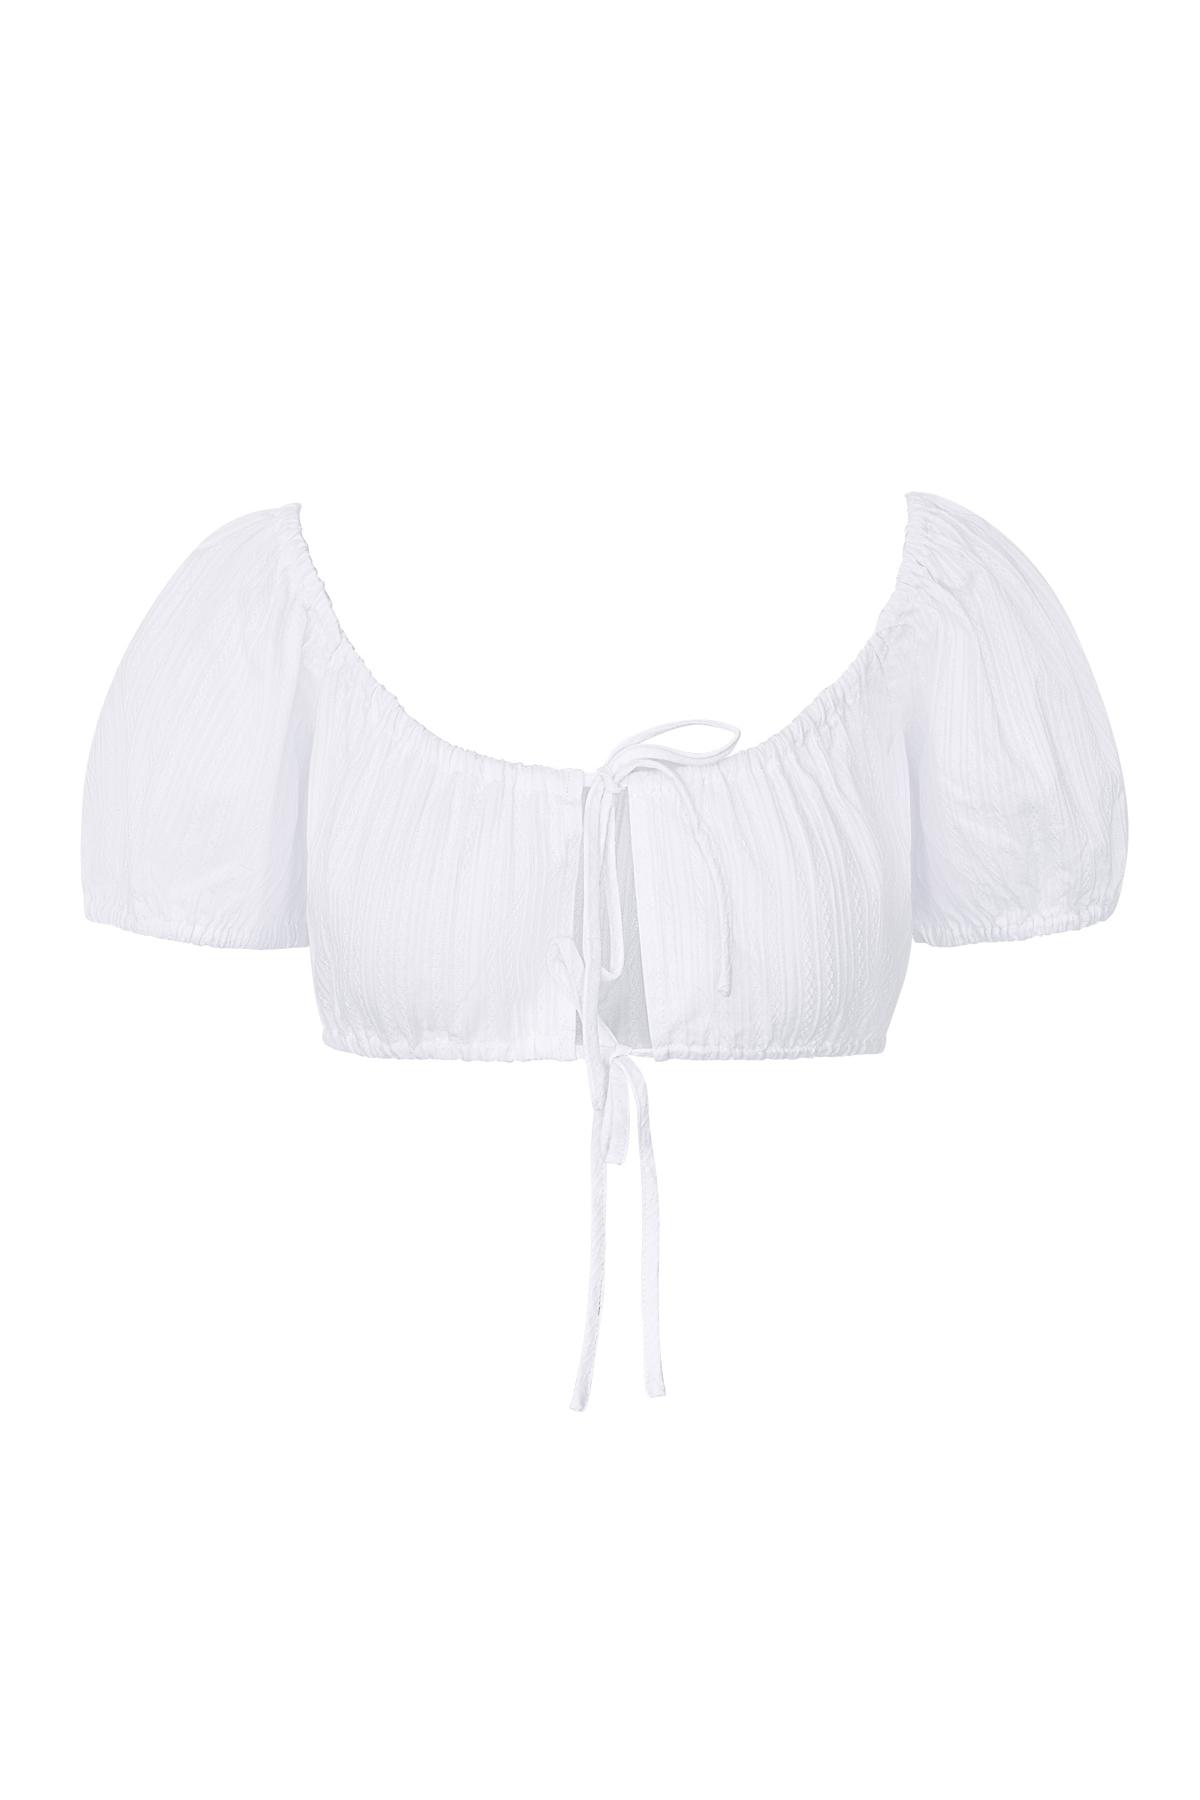 Crop top knotted White S